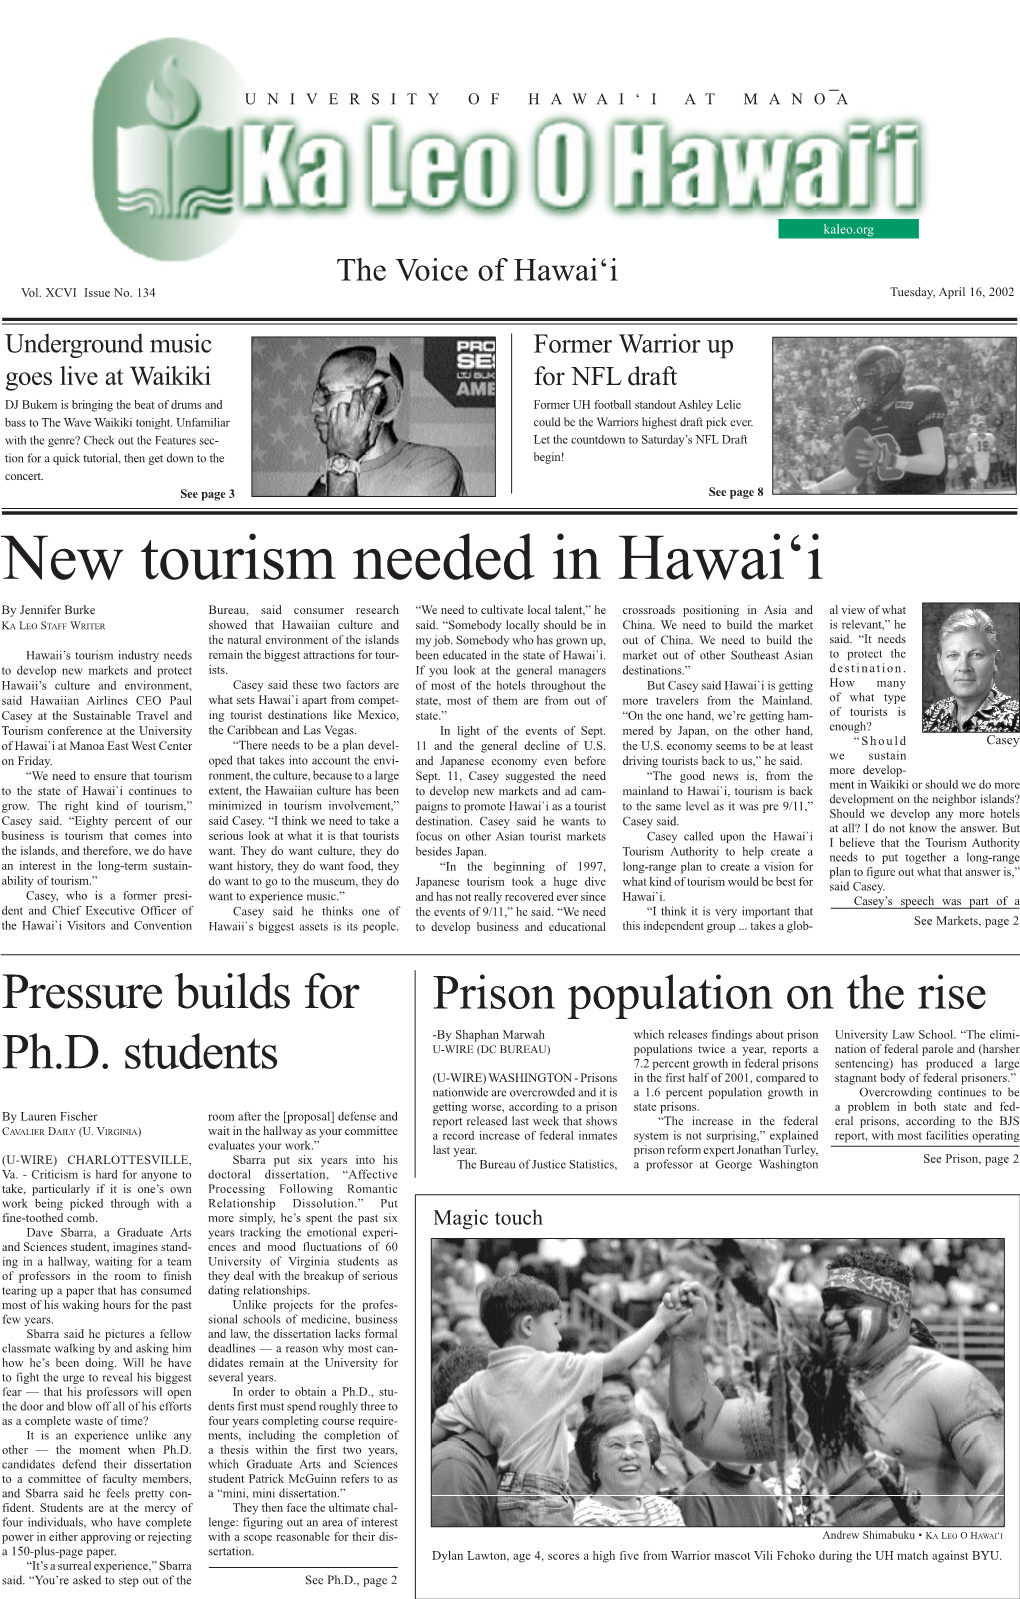 New Tourism Needed in Hawai'i